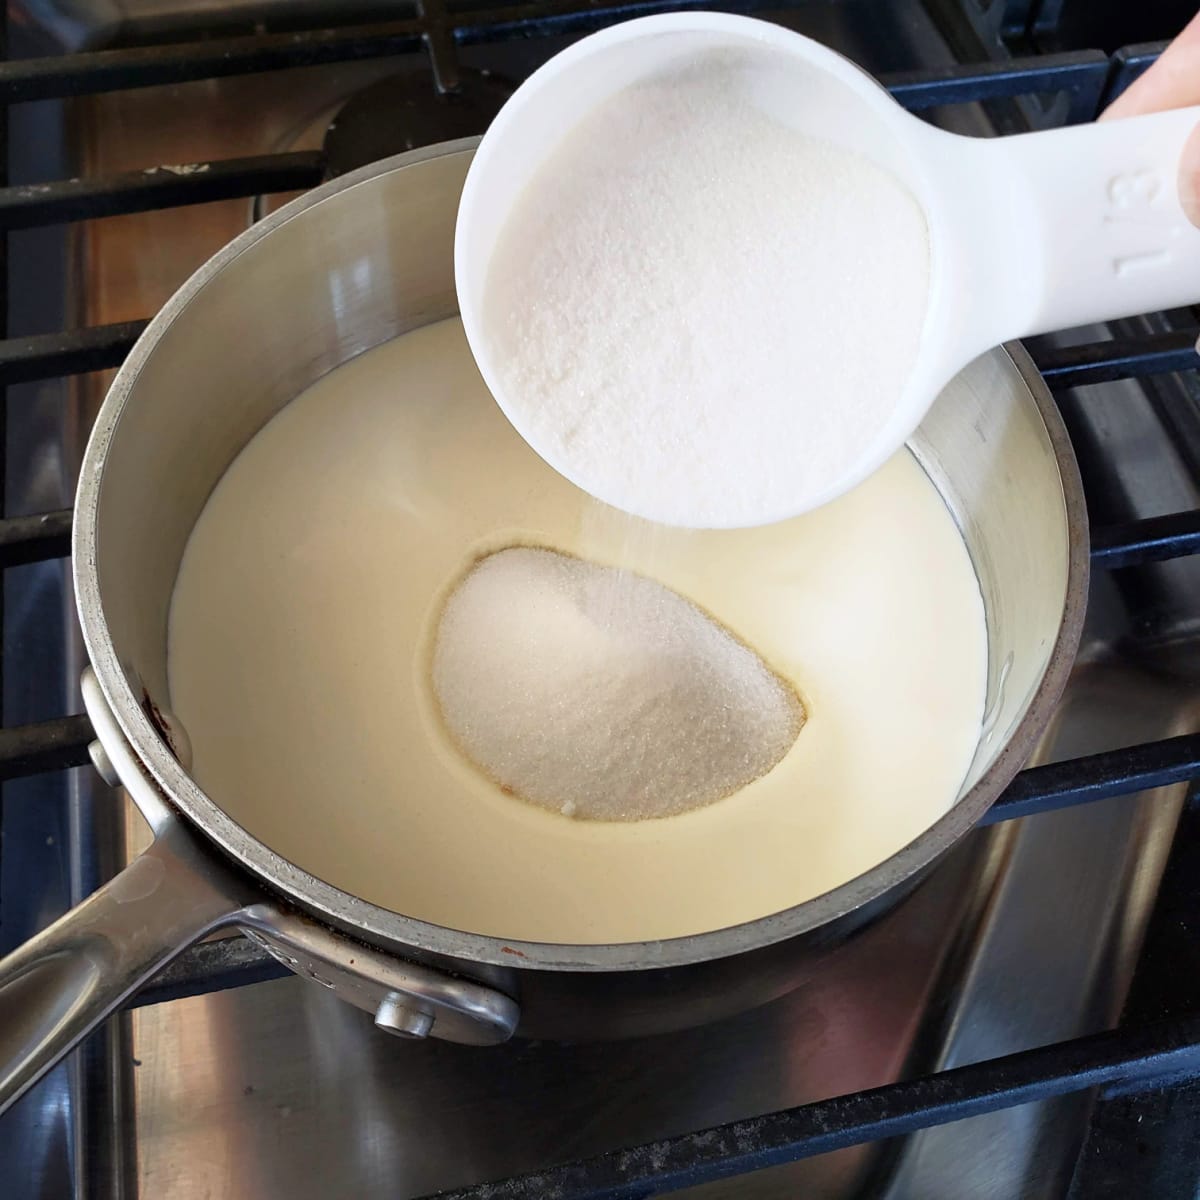 White sugar being poured into a small silver saucepan with cream, sitting on a stovetop